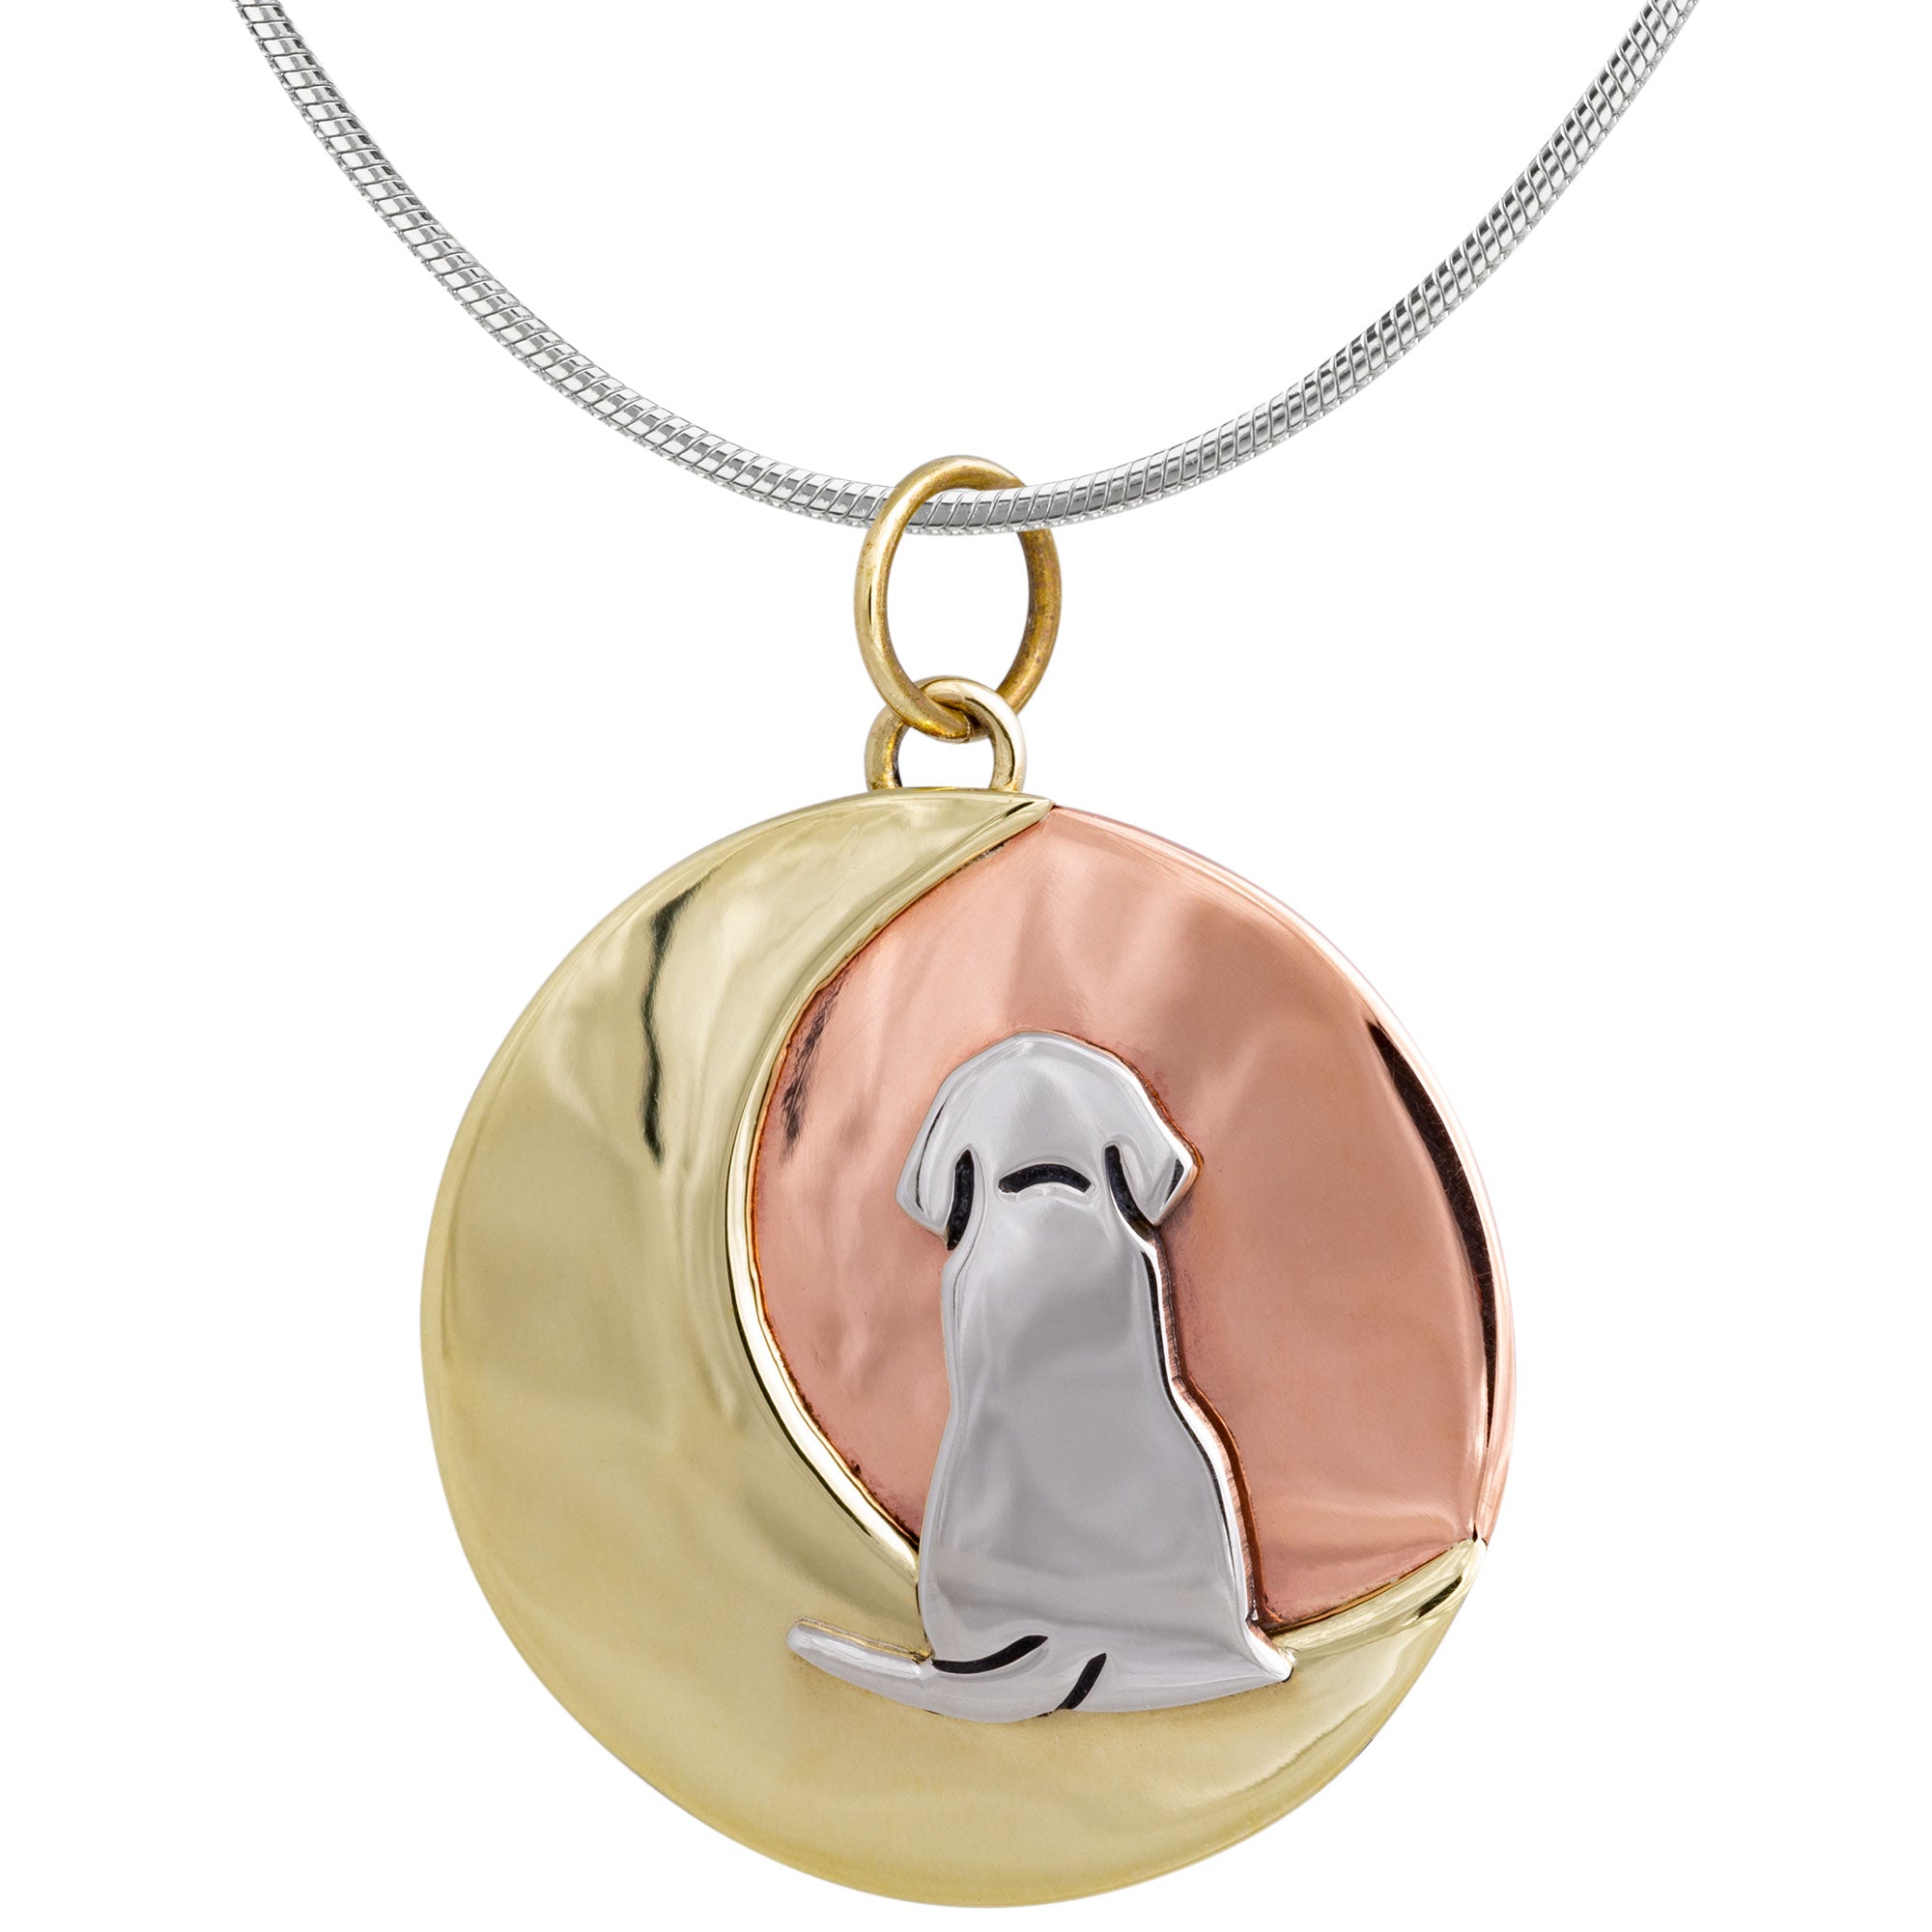 Moonlight Dog Necklace - With Rhodium Plated Chain